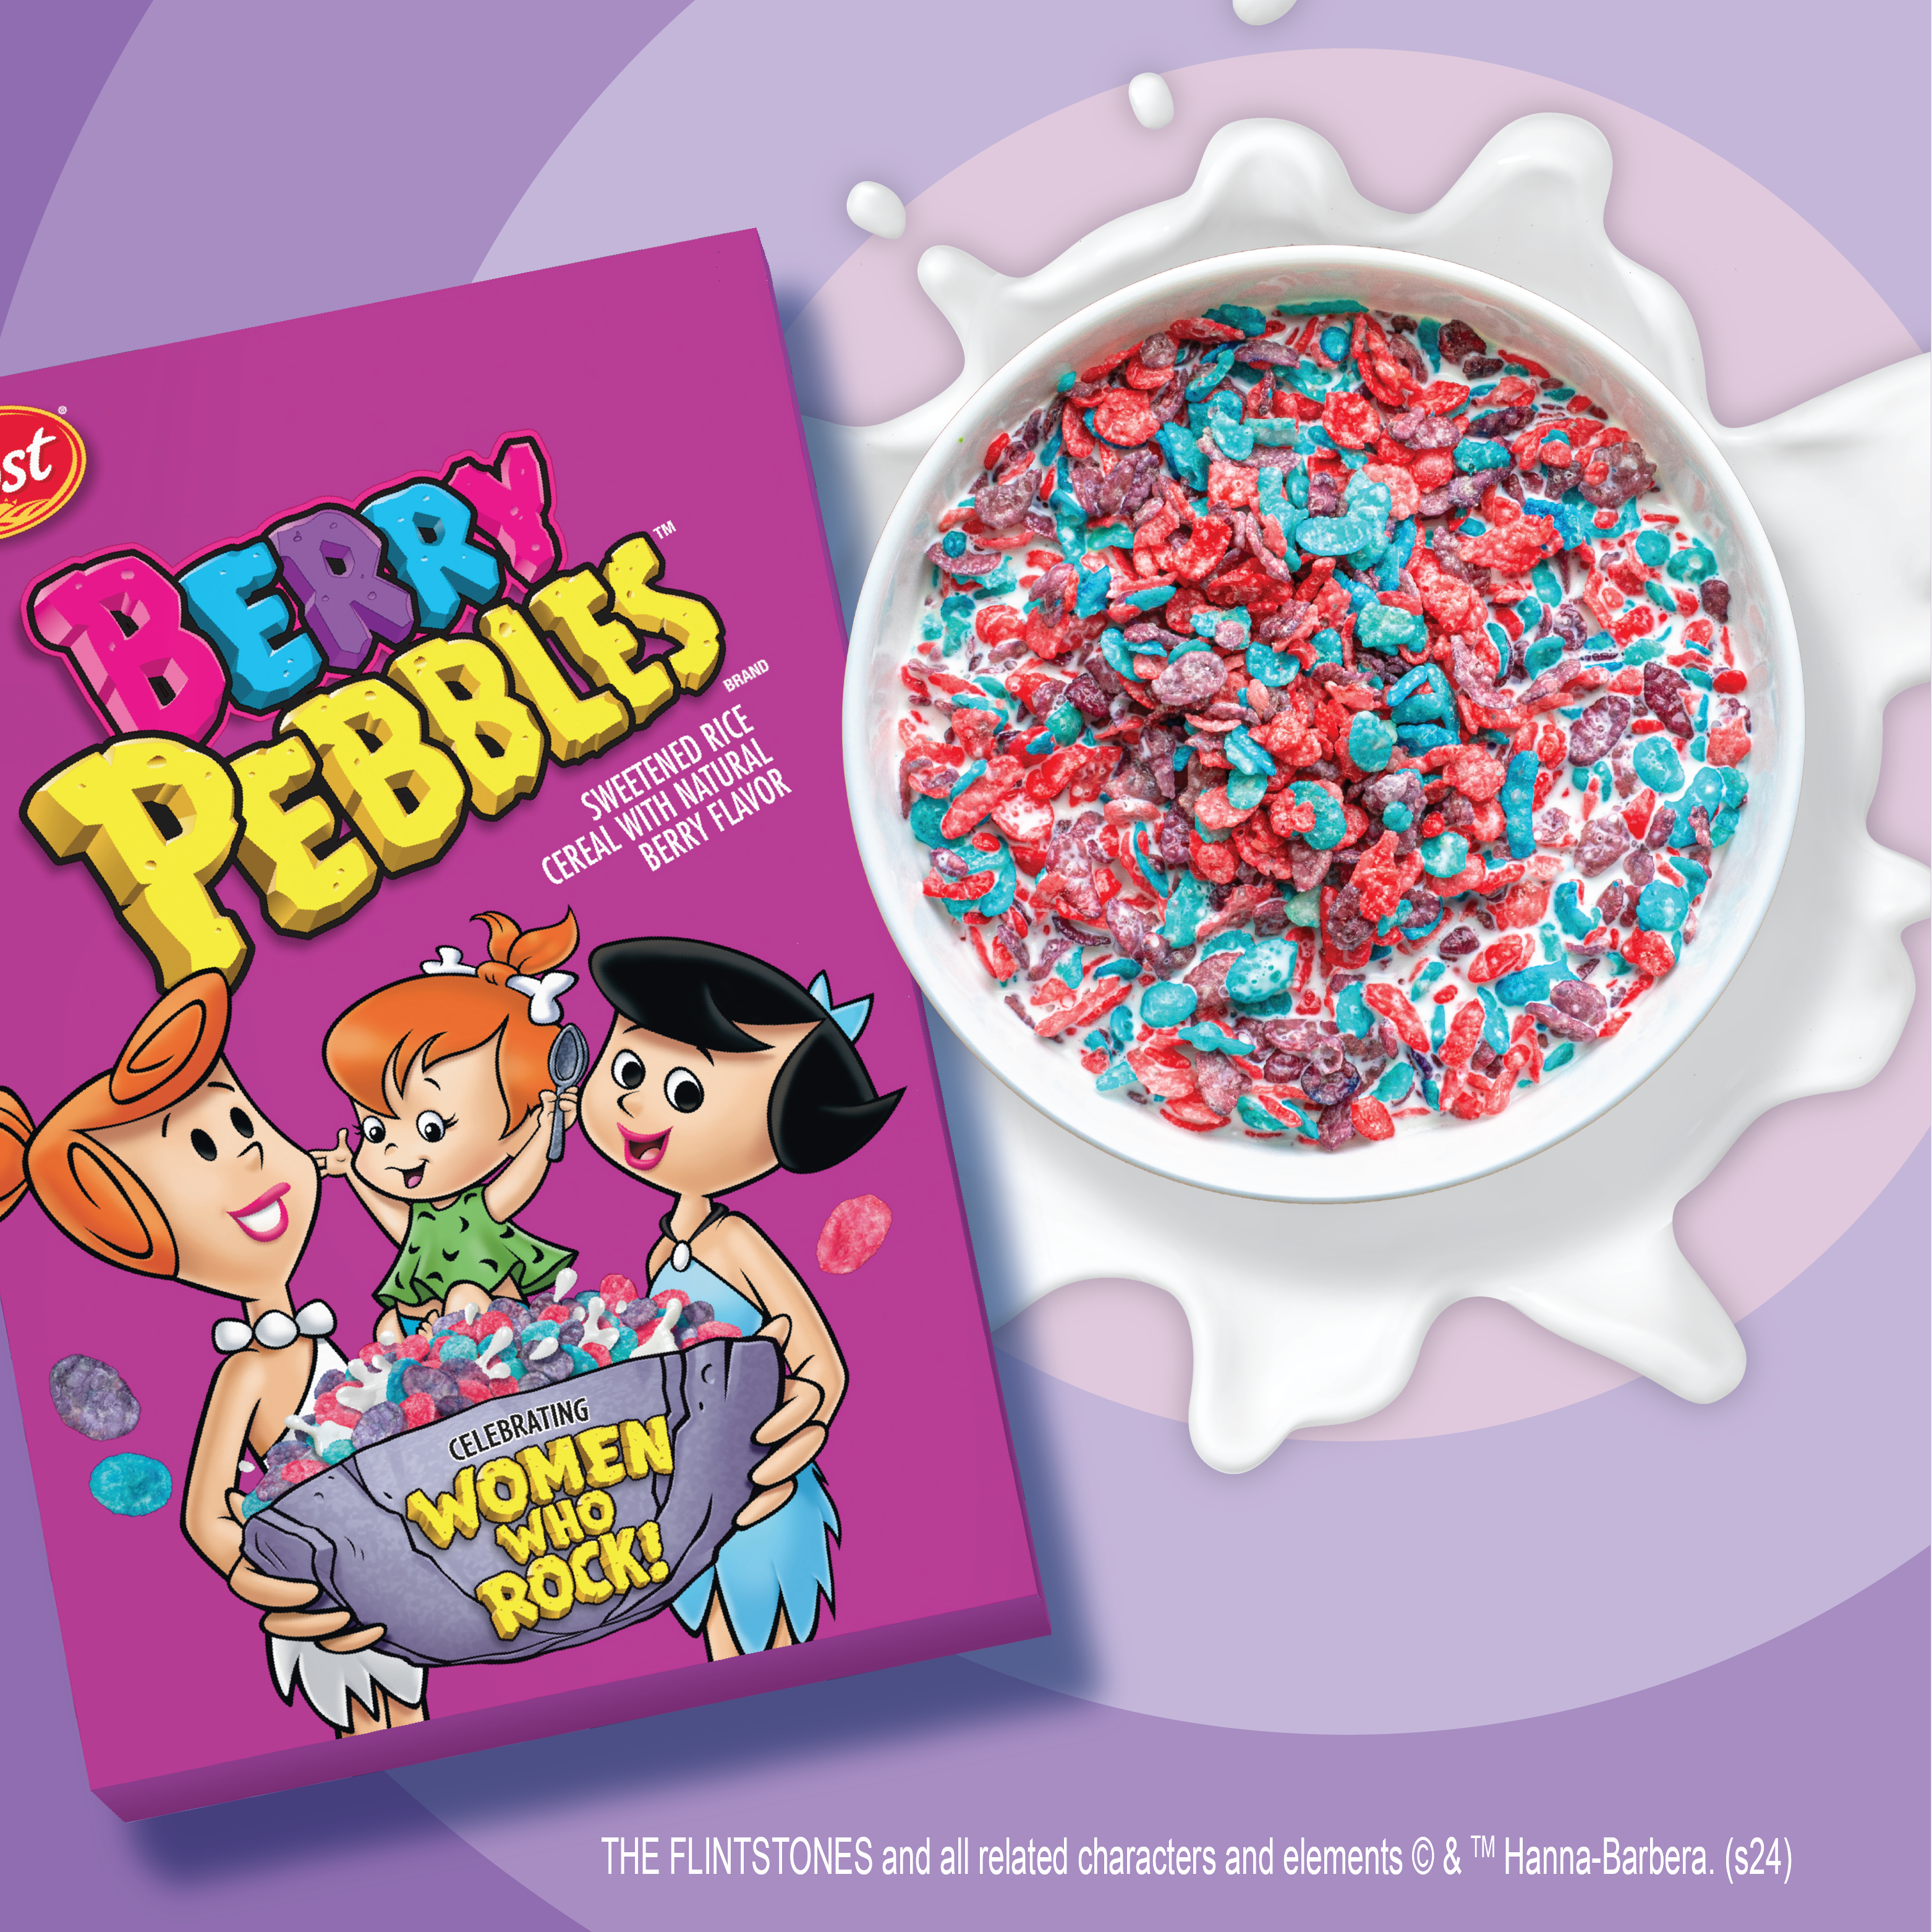 Berry PEBBLES cereal box and bowl filled with cereal